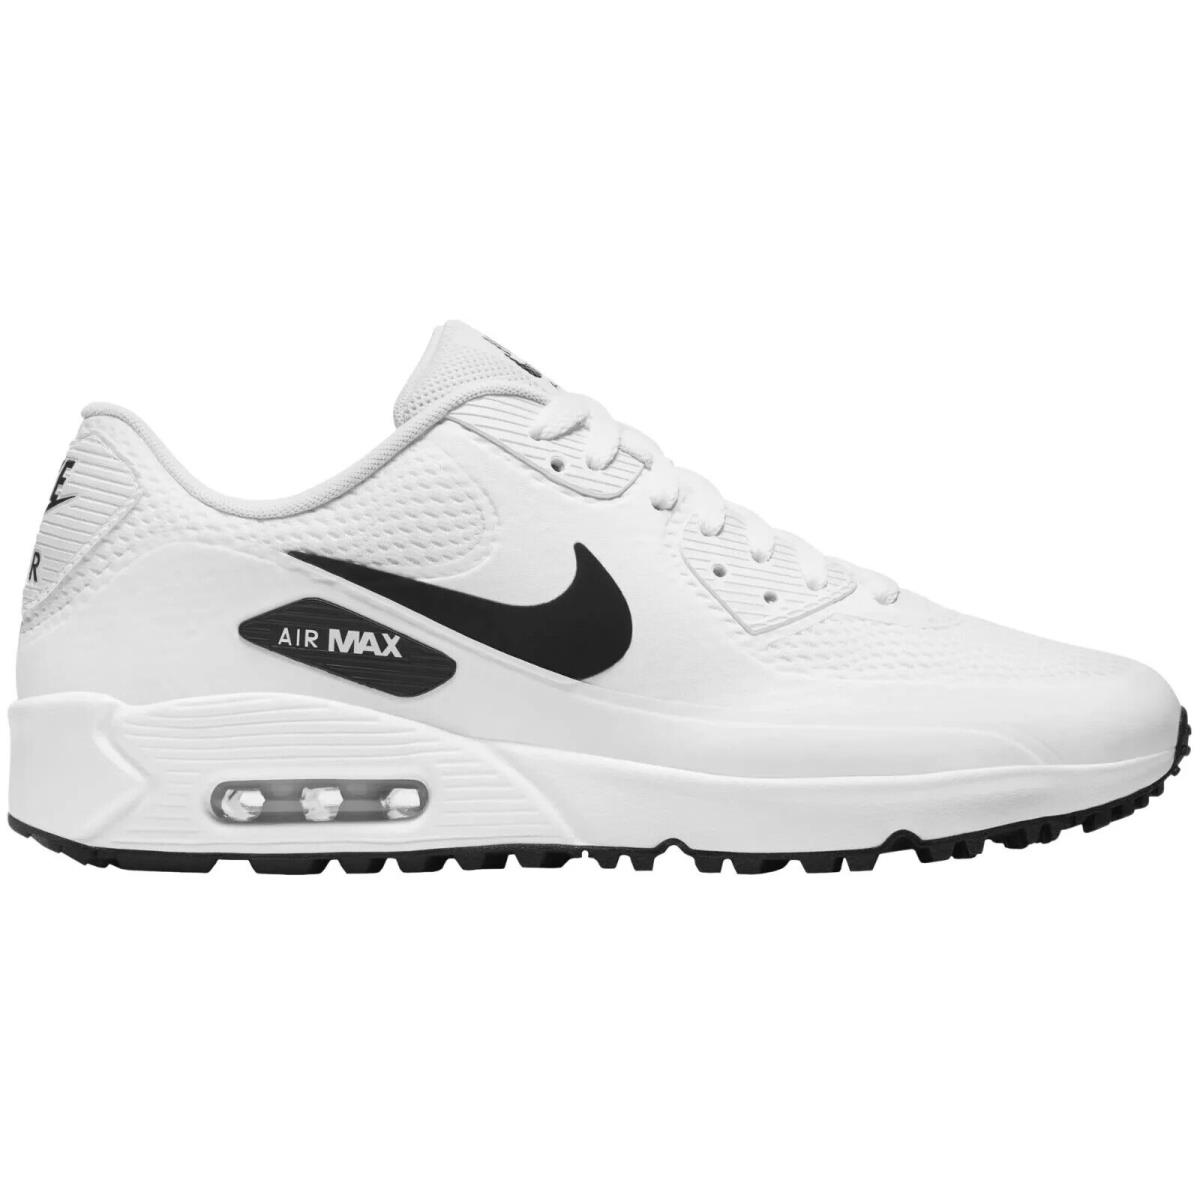 Nike Air Max 90 G Men`s Golf Shoes All Colors US Sizes 7-14 White/Black